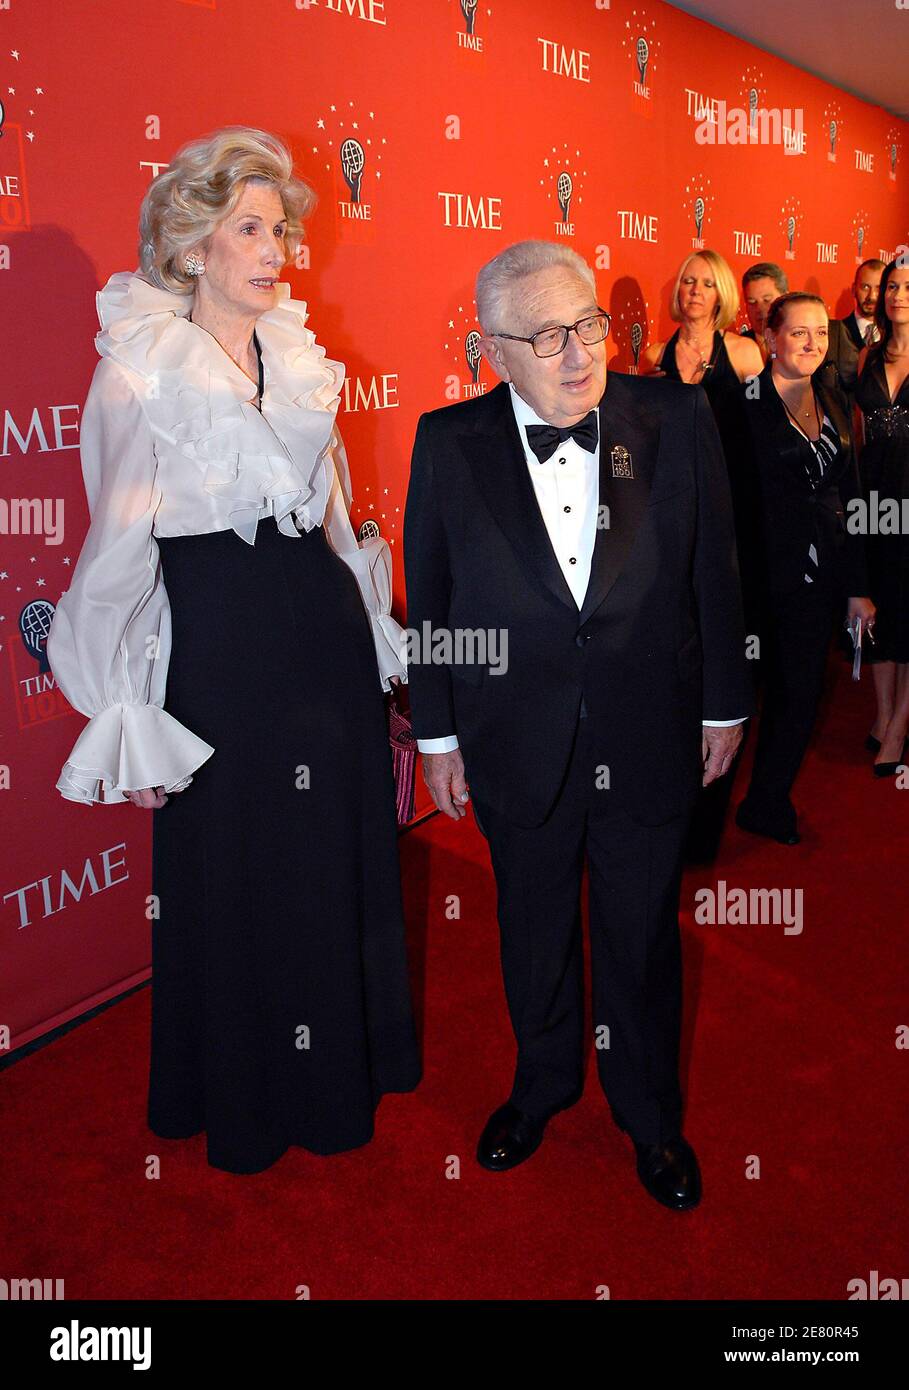 Henry Kissinger and his wife Nancy arrive for the Time's 100 Gala at Jazz at Lincoln Center in New York City, NY USA on May 8, 2007, to celebrate the magazine's list of the 100 most influential people in the World. Photo by Olivier Douliery/ABACAPRESS.COM Stock Photo